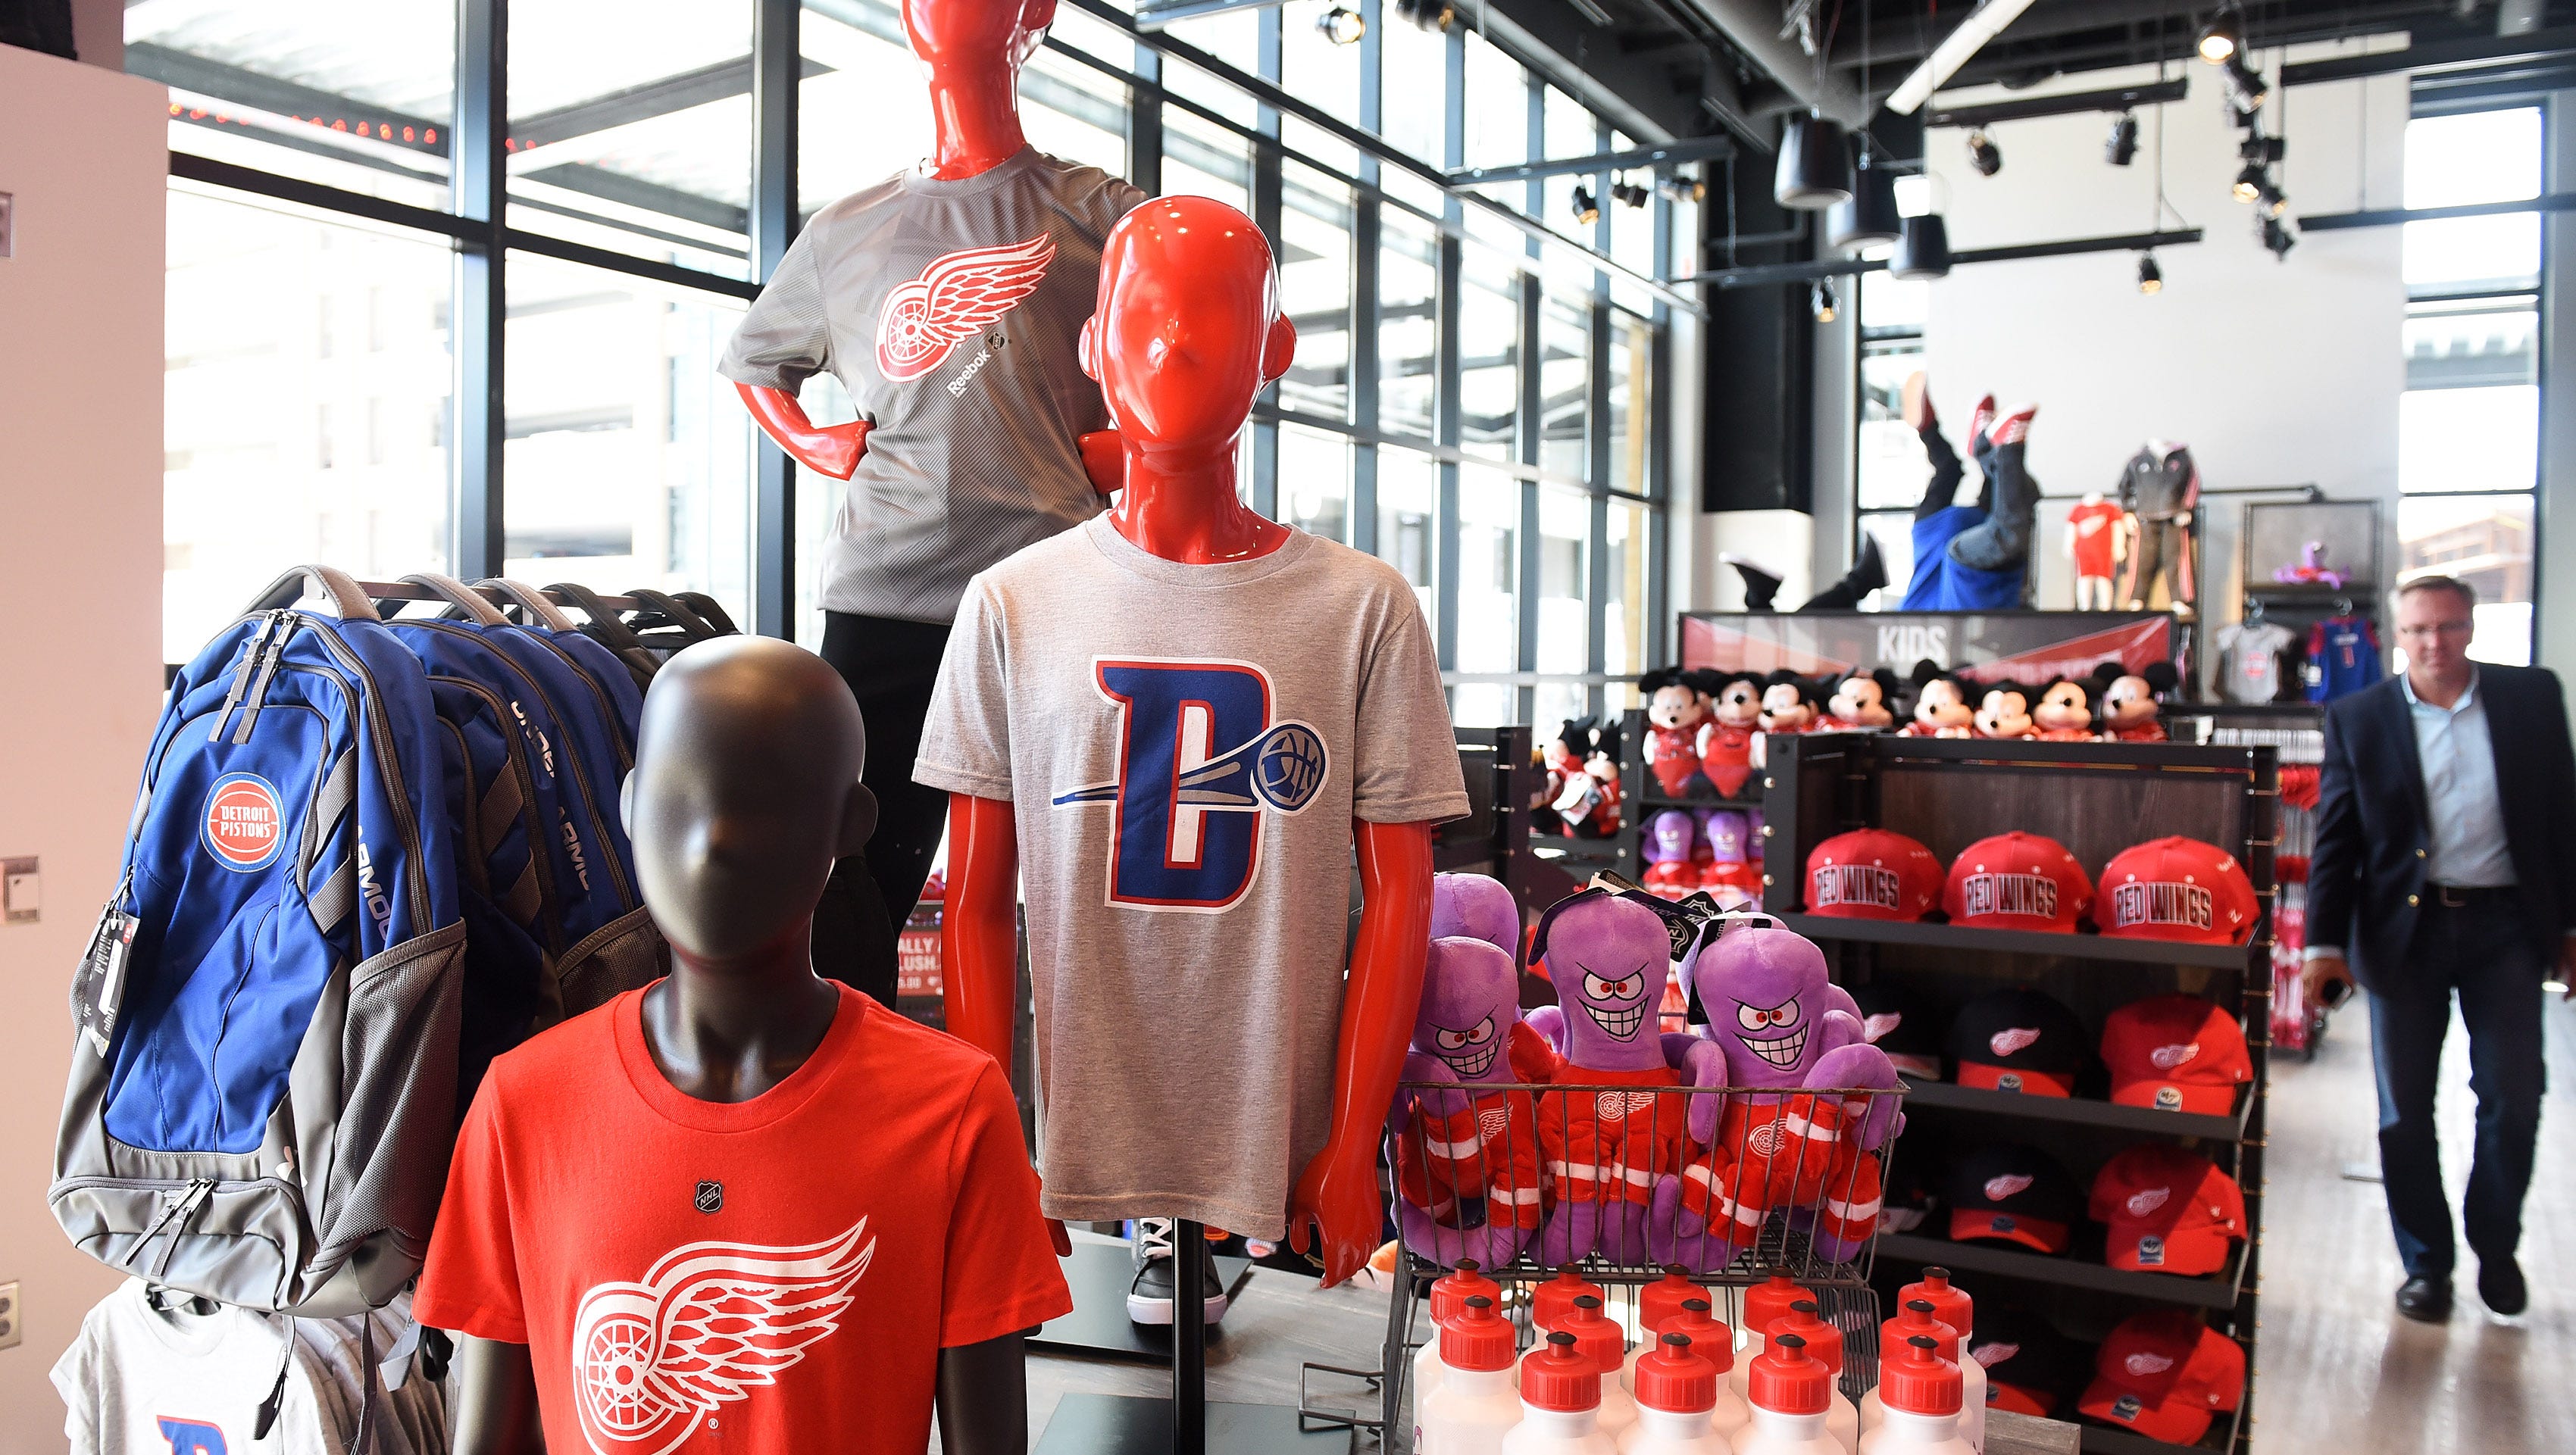 All sorts of Pistons and Red Wings gear is for sale at the Team Store.